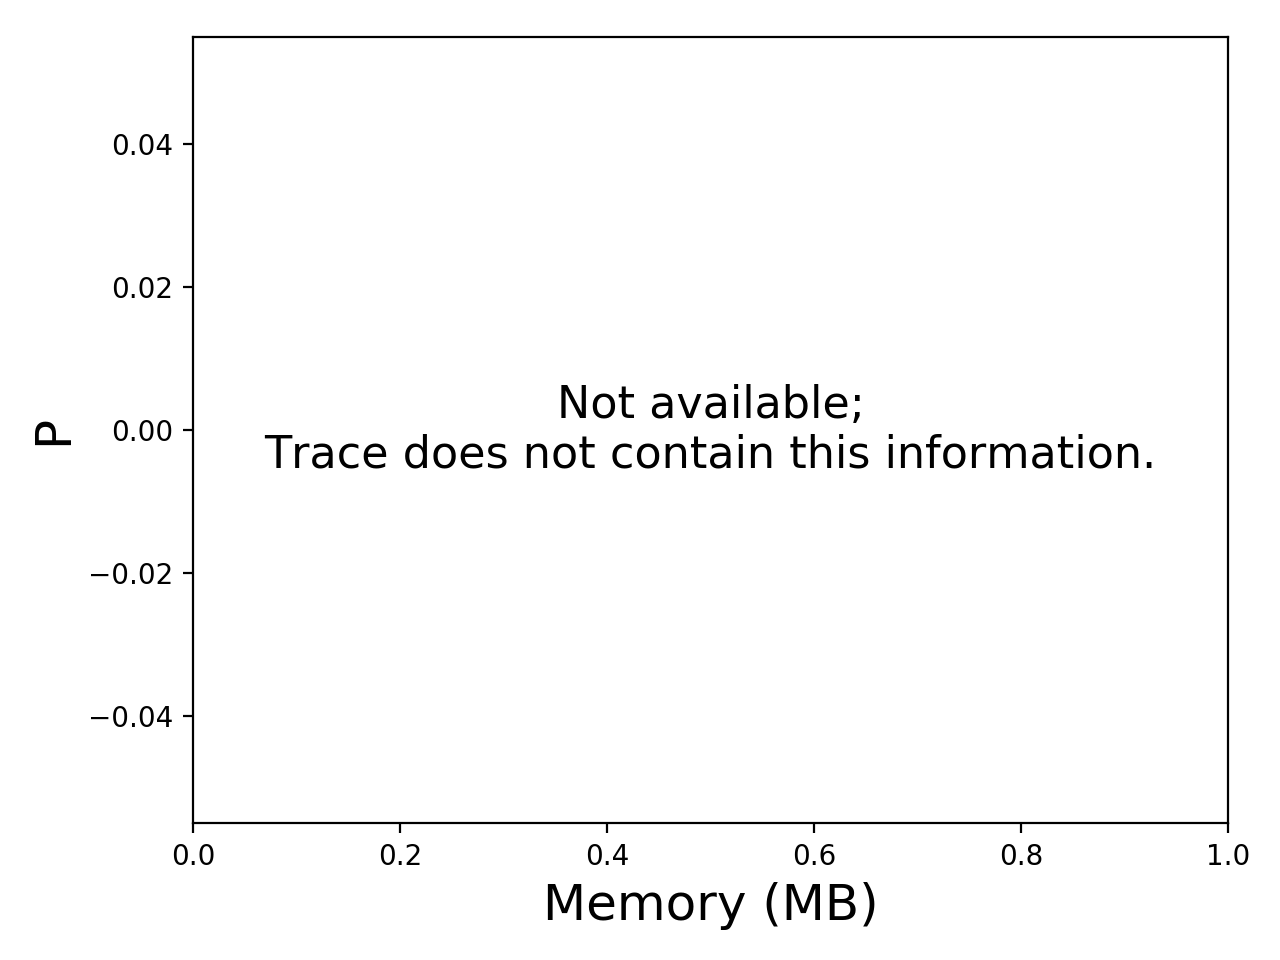 Task memory consumption graph for the workflowhub_montage_dataset-02_degree-4-0_osg_schema-0-2_montage-4-0-osg-run009 trace.